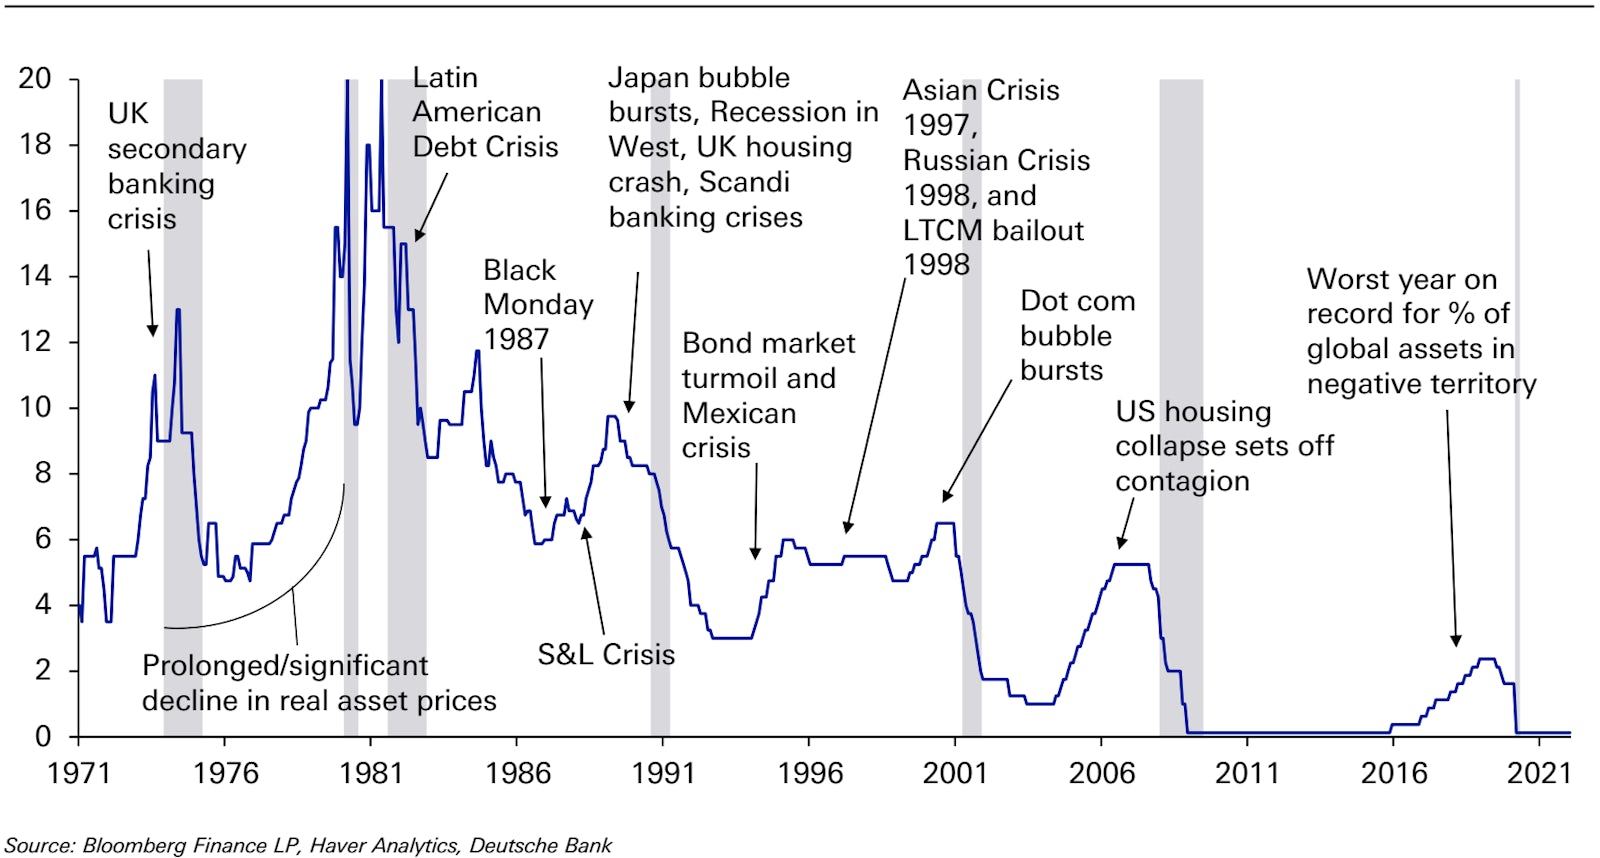 Fed Funds Rate Hiking Cycles And Financial Crises | Source: Deutsche Bank